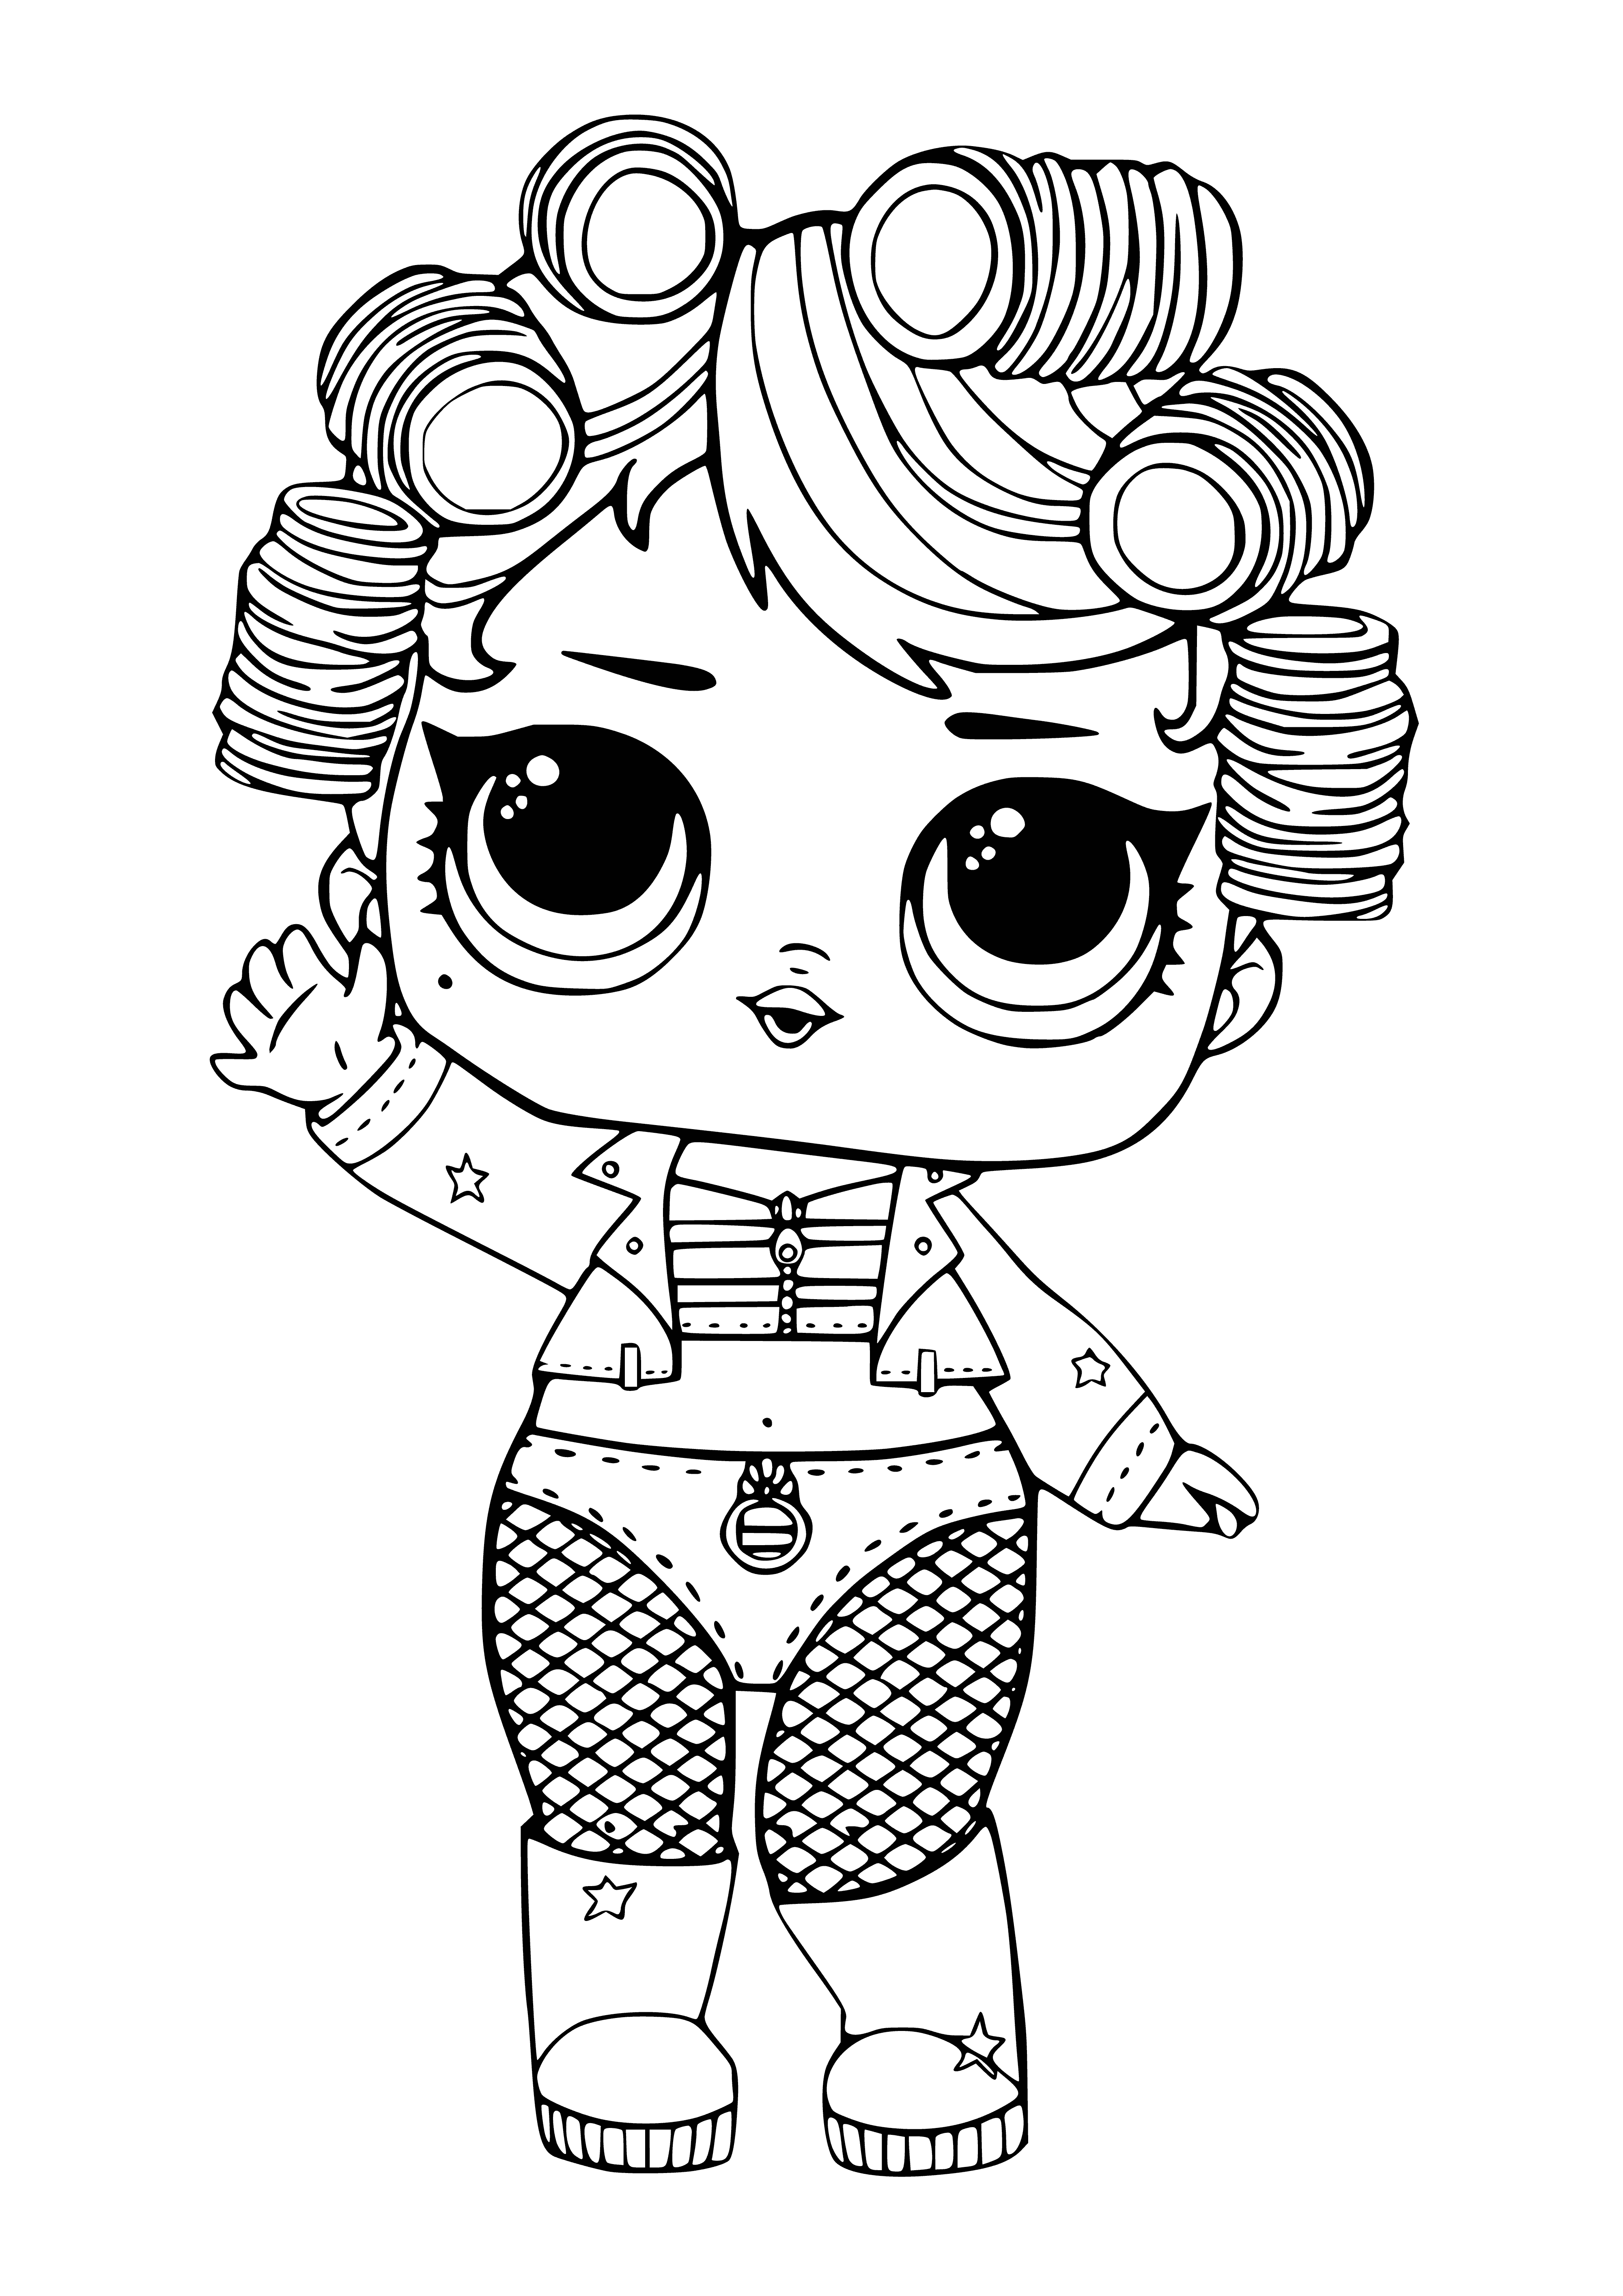 coloring page: Color a toy queen figurine with a confetti skirt and wand, standing on a circular base holding a heart-shaped balloon. #LOLGooGooQueen